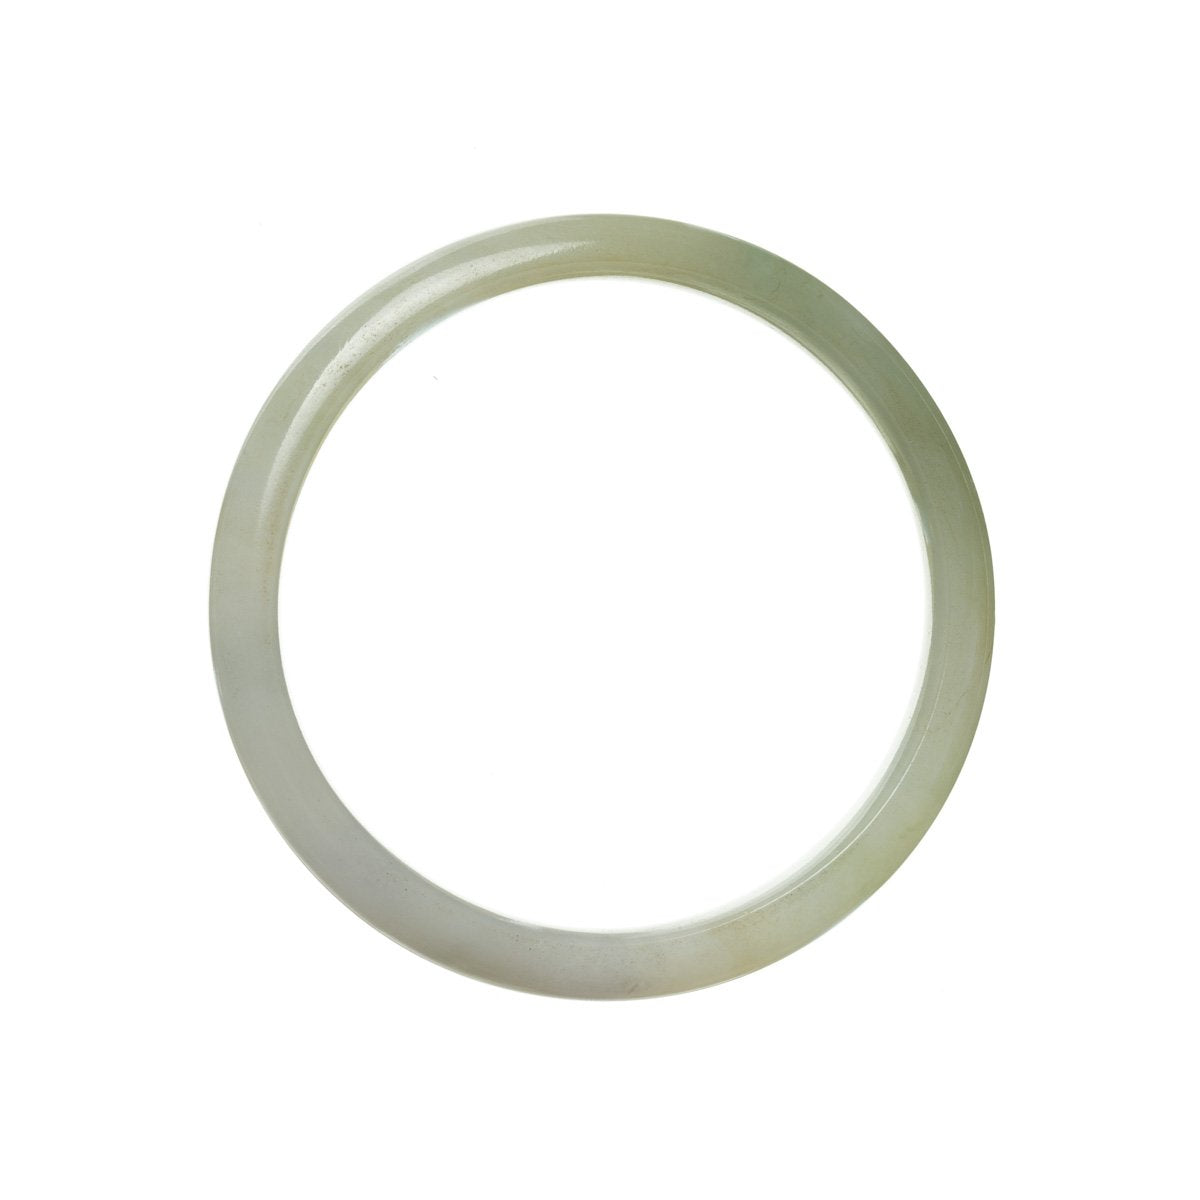 A close-up image of a genuine Grade A green and white jade bangle bracelet with a semi-round shape, measuring 54mm in diameter. The bracelet is from the brand MAYS.